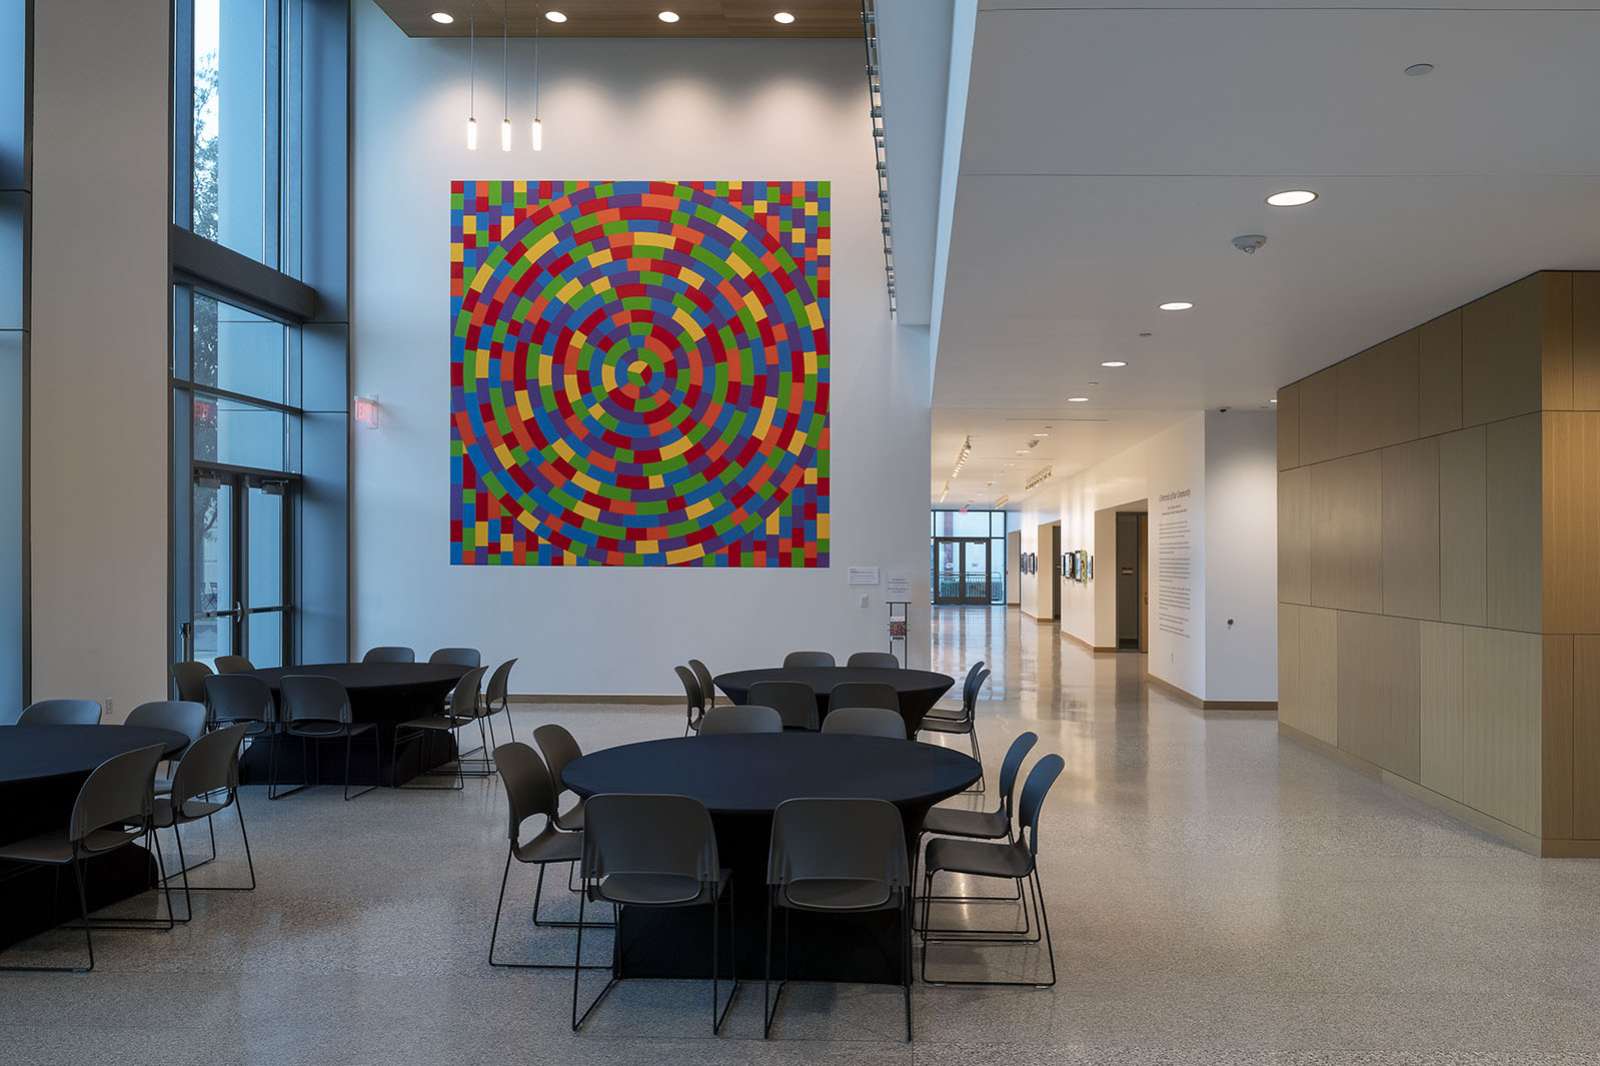 Sol LeWitt, Wall Drawing #1115: Circle within a square, each with broken bands of color, 2014, Acrylic paint, dimensions variable. Gift of Russell H. Pitman. © Estate of Sol LeWitt / Artists Rights Society (ARS), New York. Photo by Nash Baker.